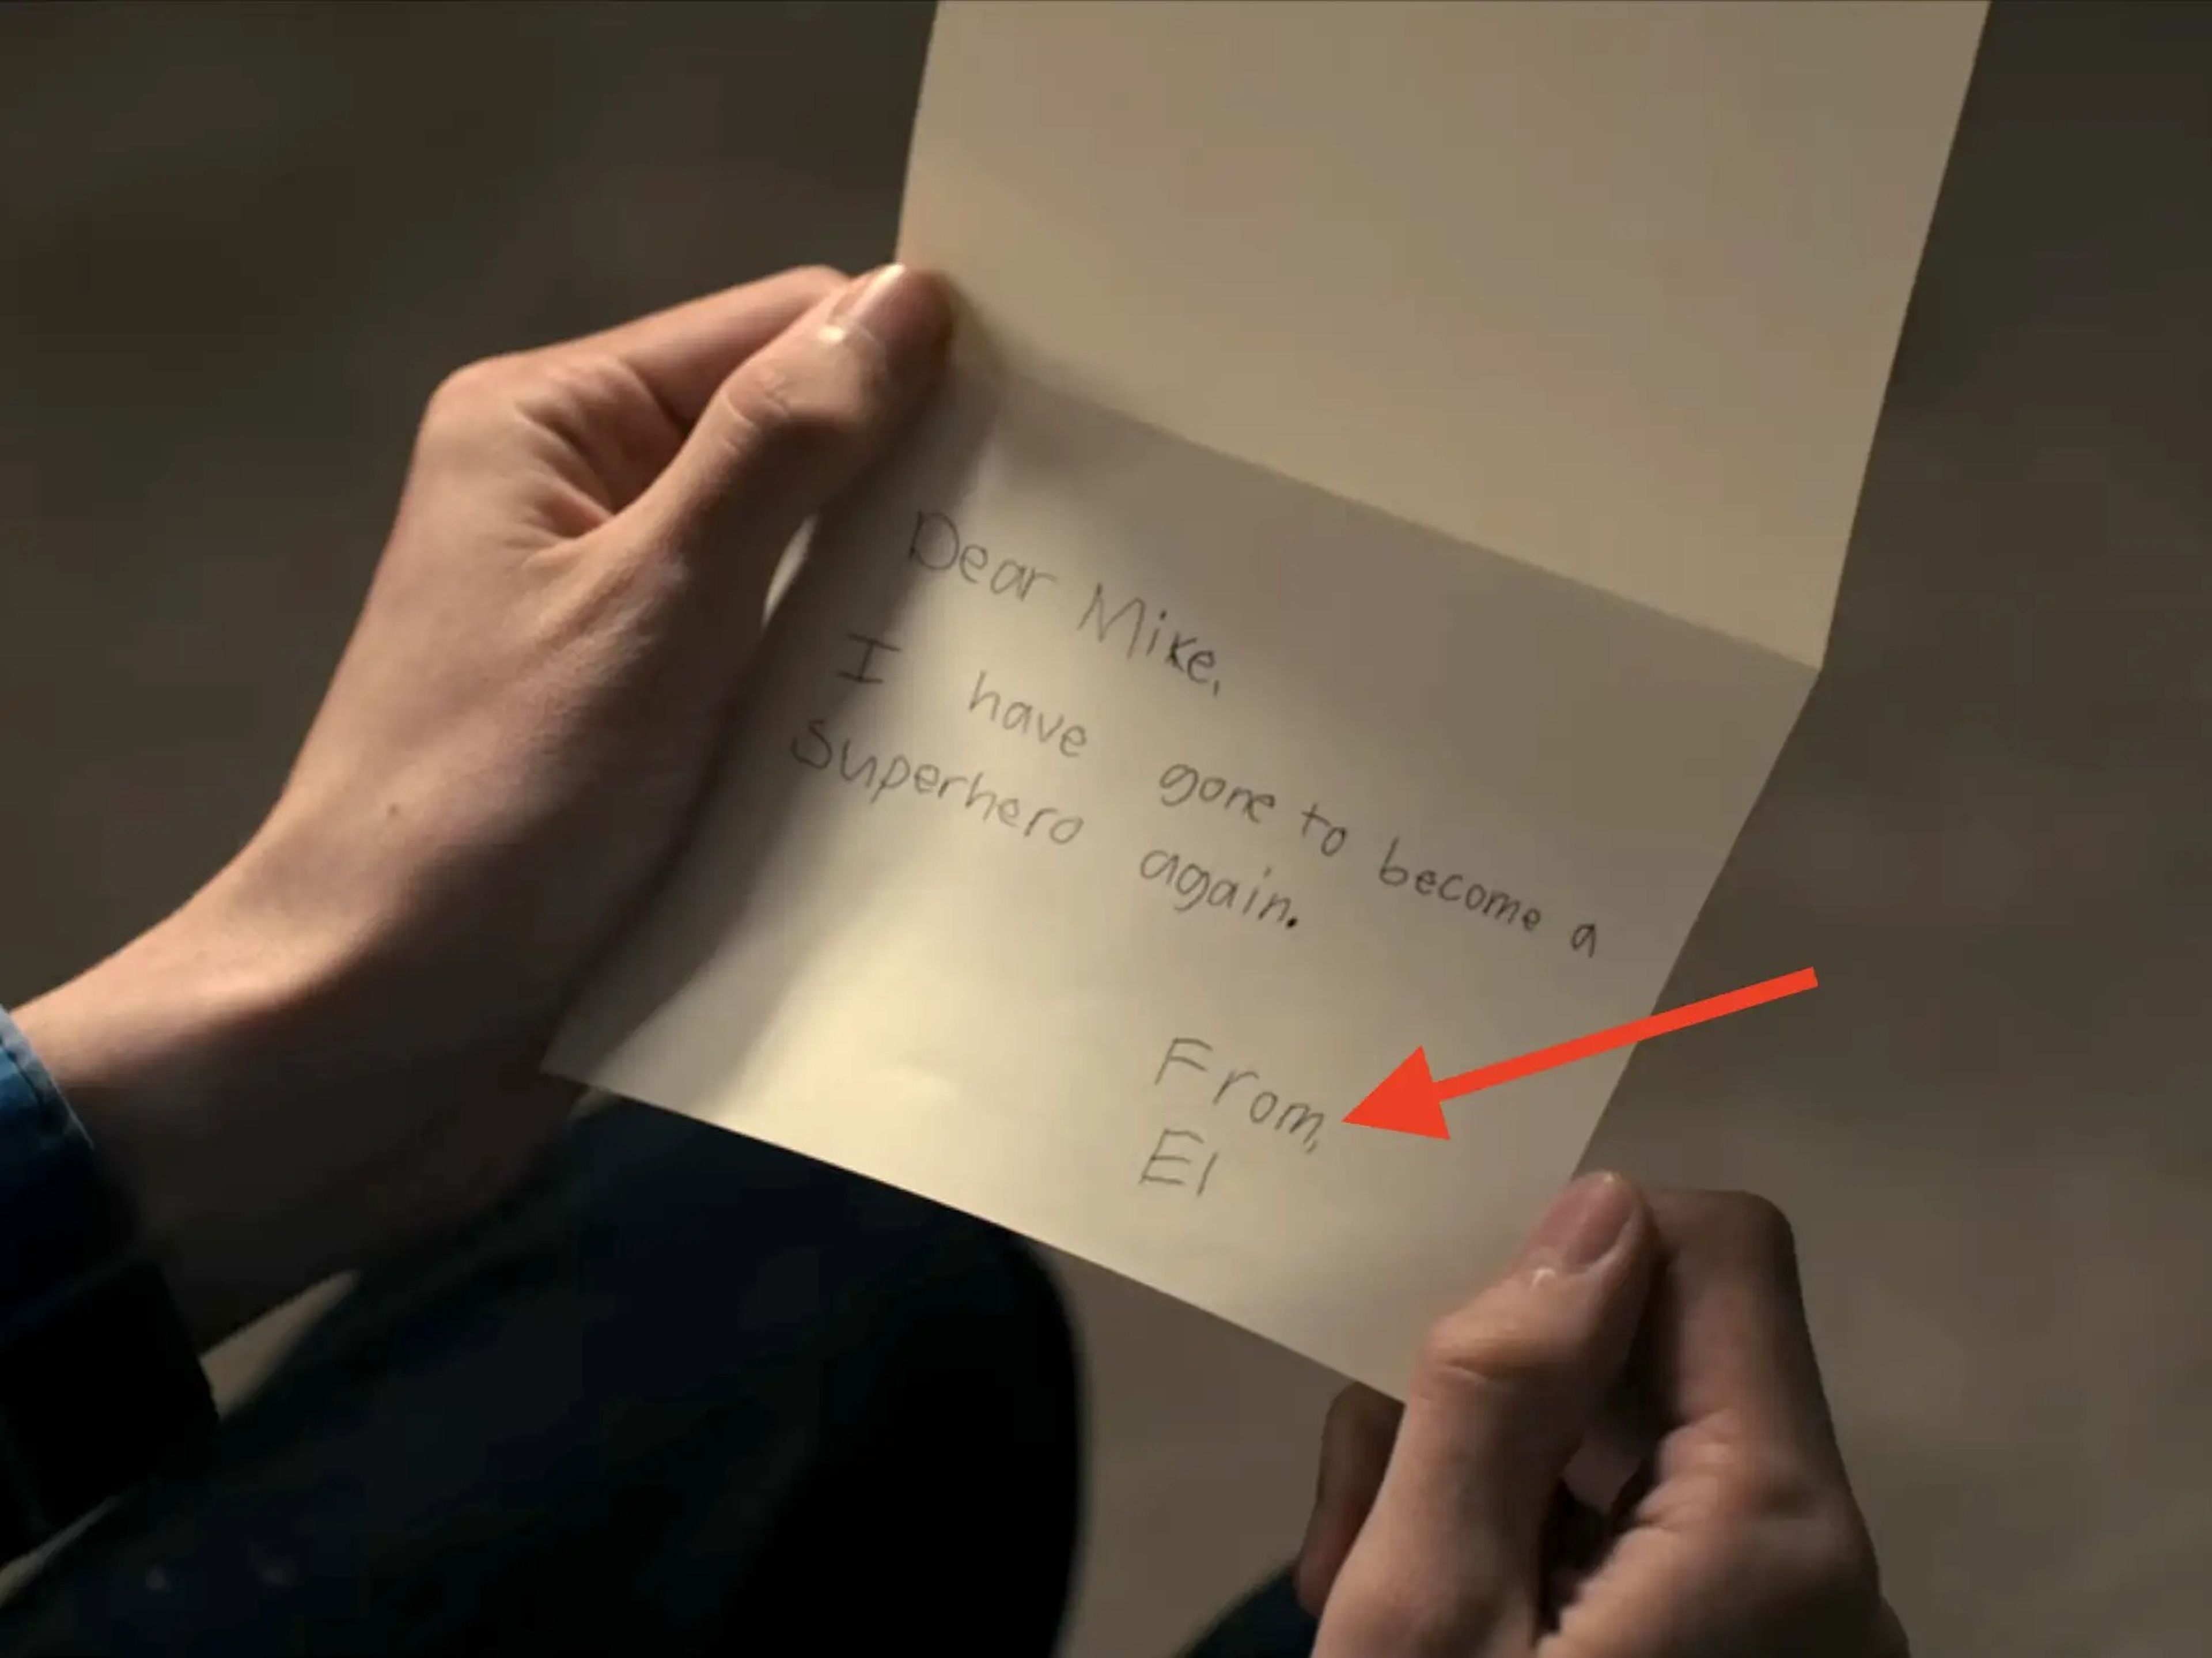 A scene from Netflix's sci-fi series "Stranger Things," showing a letter signed "From, El."